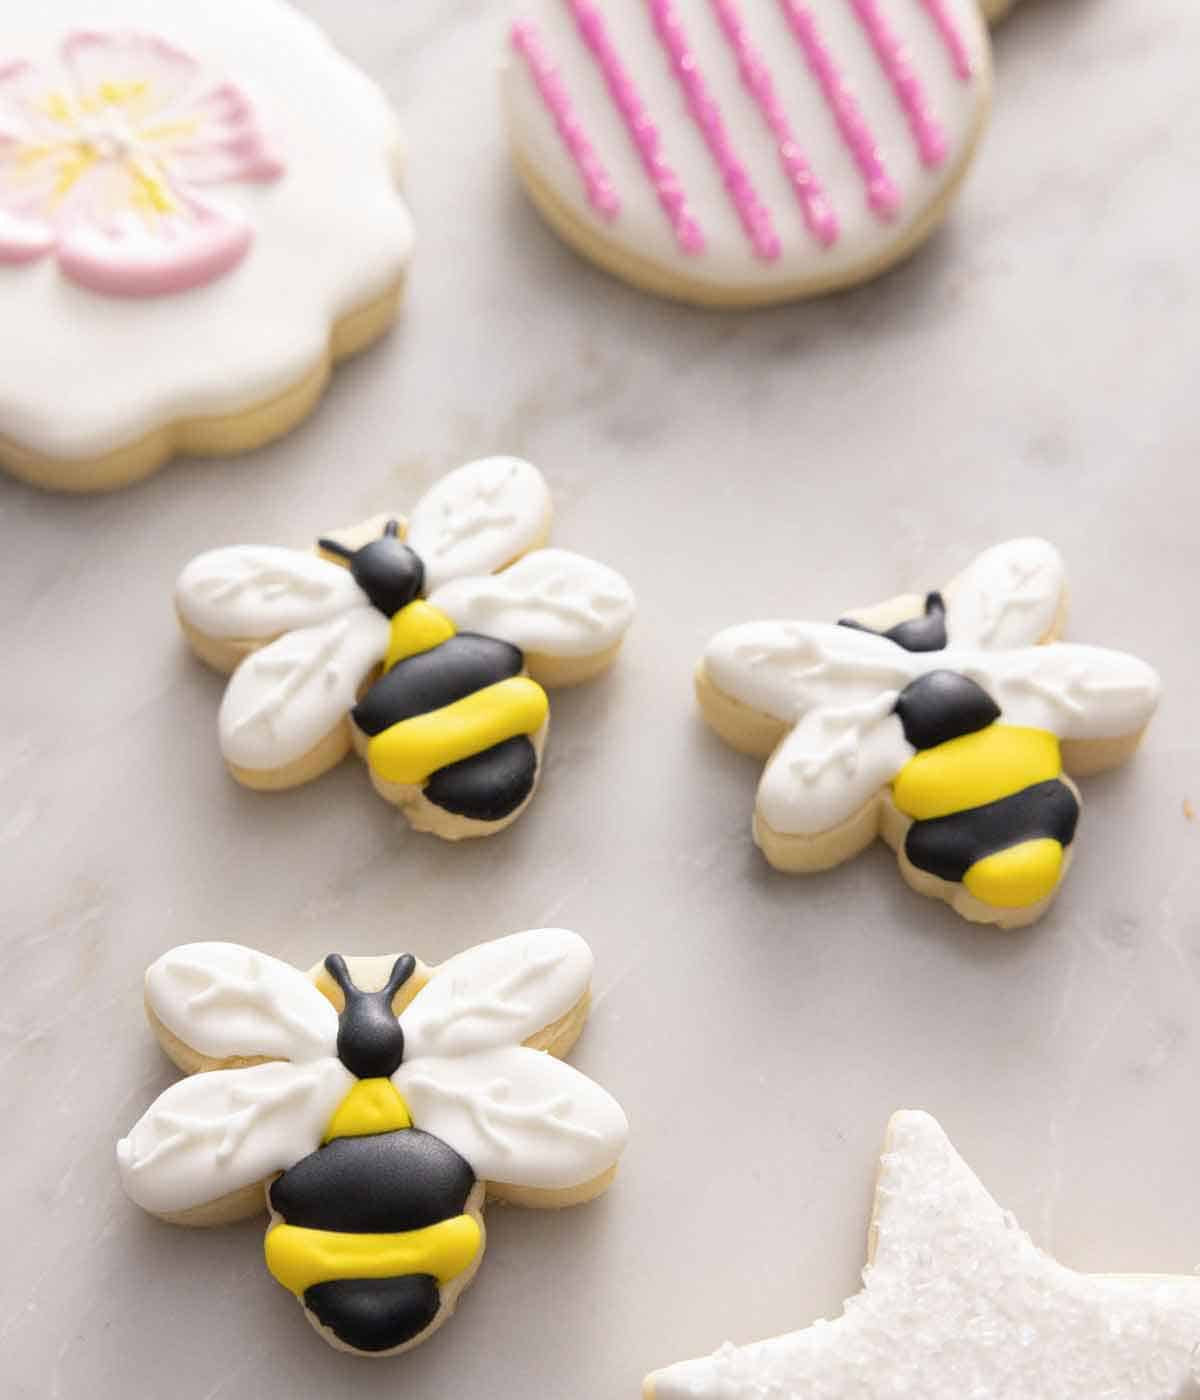 Bumblebee cookies decorated with royal icing.